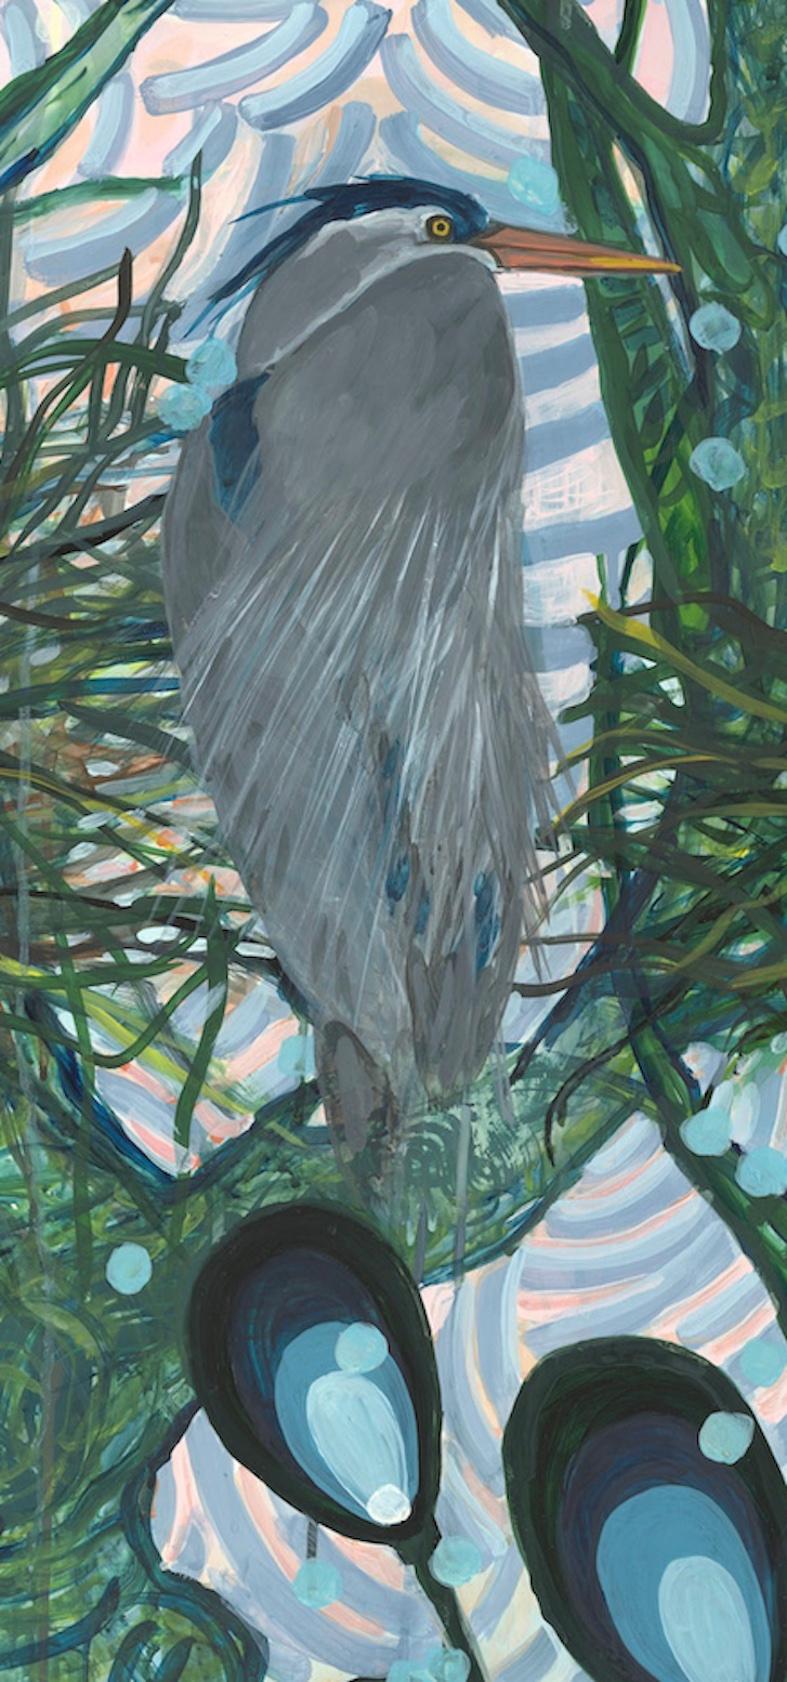  Large Nature Diptych Heron Rookery Watercolor & Acrylic on Mylar Greens, Blues  For Sale 2